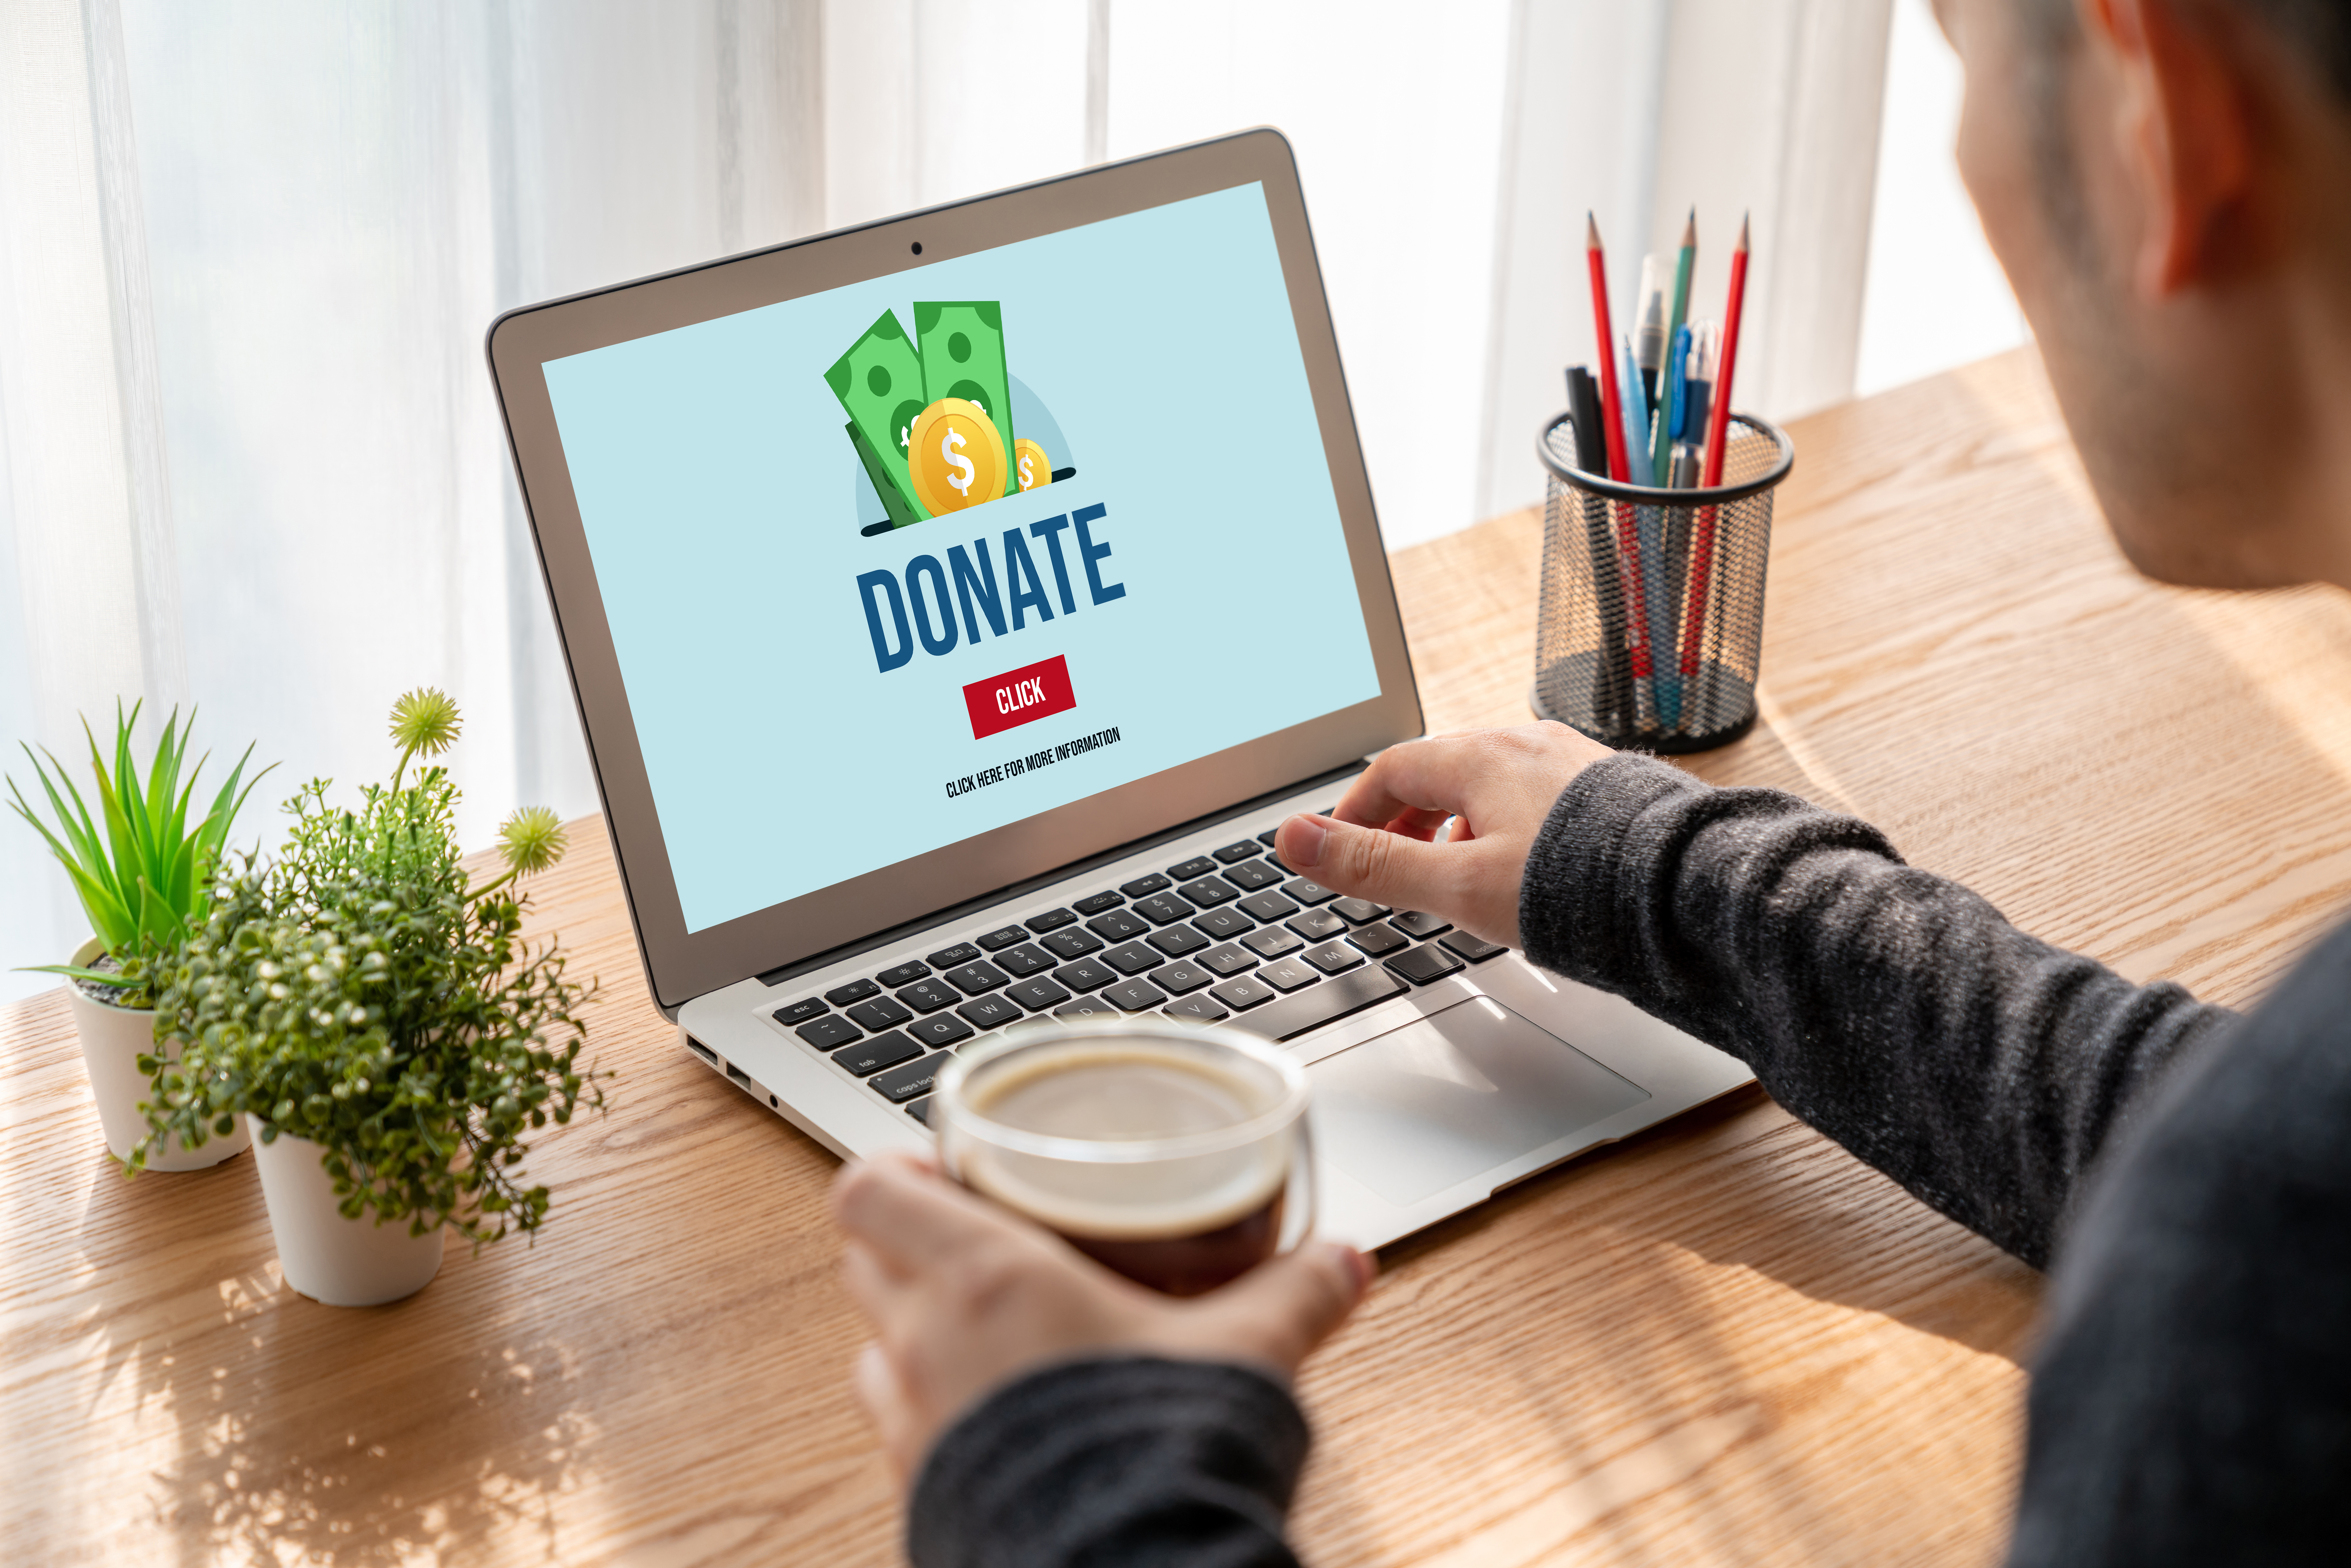 Laptop with screen showing "Donate" webpage